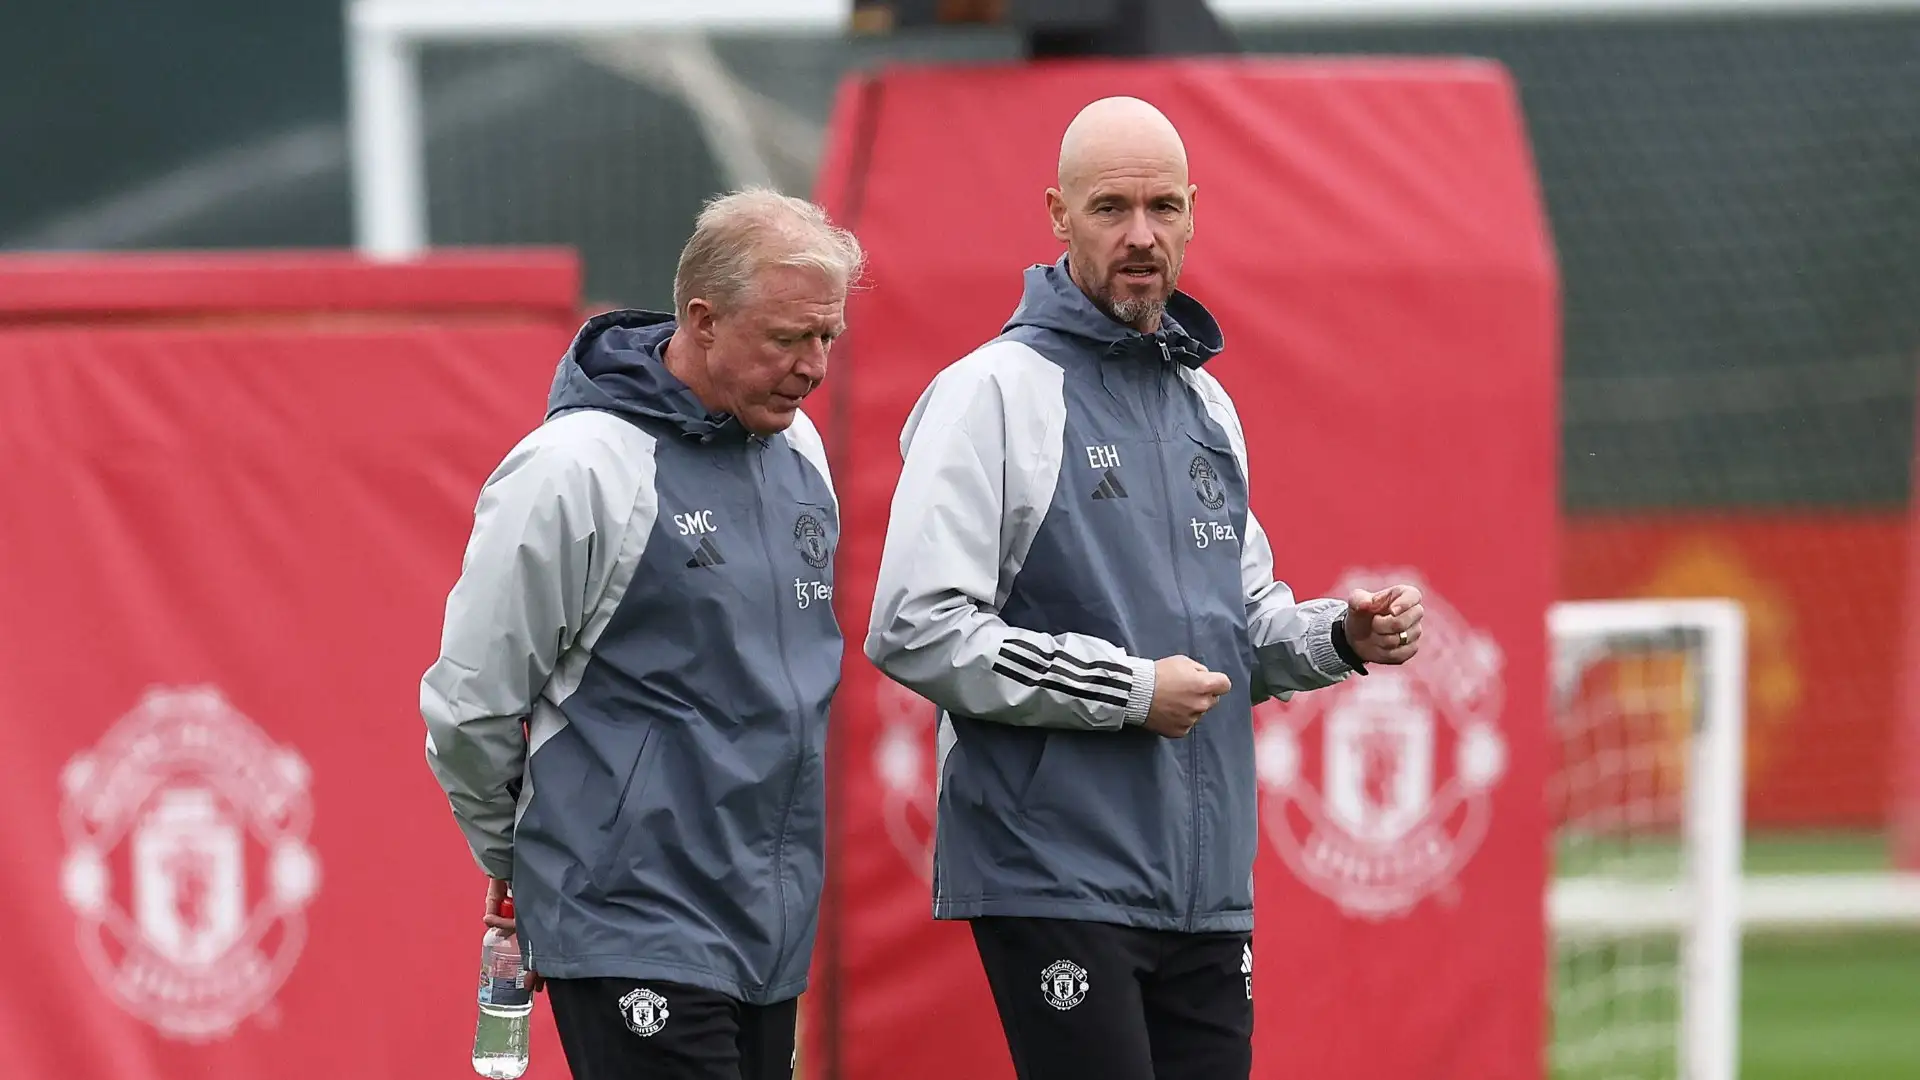 Explained: Why Steve McClaren expected to stay at Man Utd even if Erik ten Hag is sacked this summer